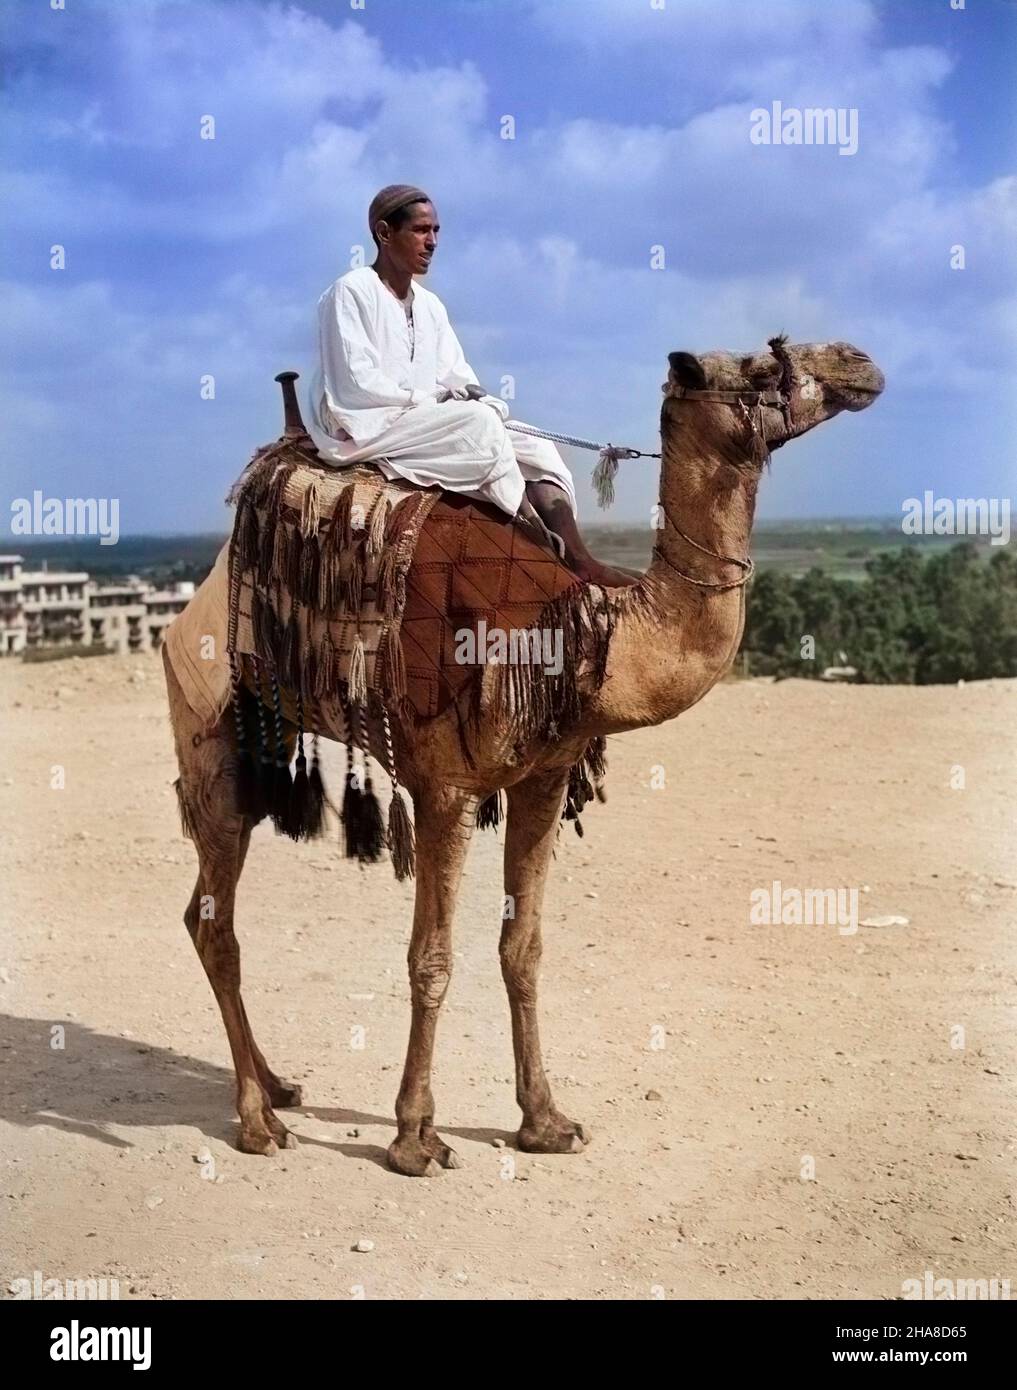 1920s 1930s EGYPTIAN MAN SITTING ON A RIDING TOURIST DROMEDARY CAMEL Camelus dromedarius WITH FRINGEDSADDLE GIZA CAIRO EGYPT - q364c HAR001 HARS TIME OFF RIDER CAMEL ADVENTURE GIZA GETAWAY EXCITEMENT TOURIST HOLIDAYS OCCUPATIONS CREATURE FRINGED GENUS MAMMAL RESORTS UNGULATE VACATIONS HAR001 MIDDLE EAST MIDDLE EASTERN NORTH AFRICA NORTH AFRICAN OLD FASHIONED TRAVEL AFRICA Stock Photo